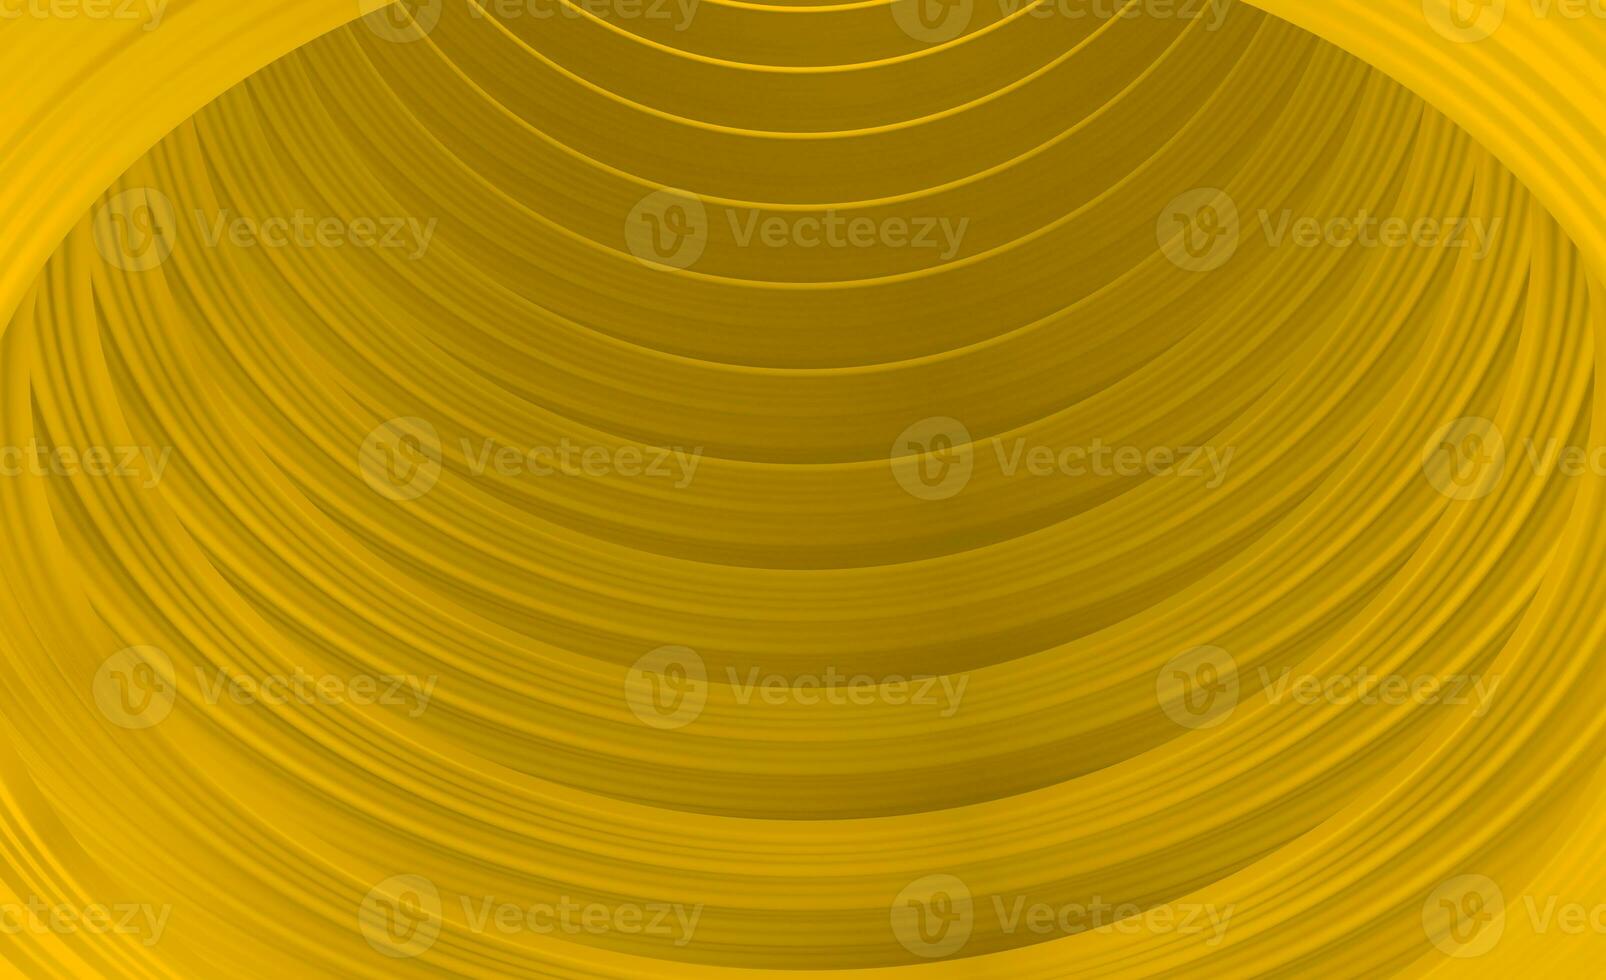 Abstract dynamic textured wave background photo